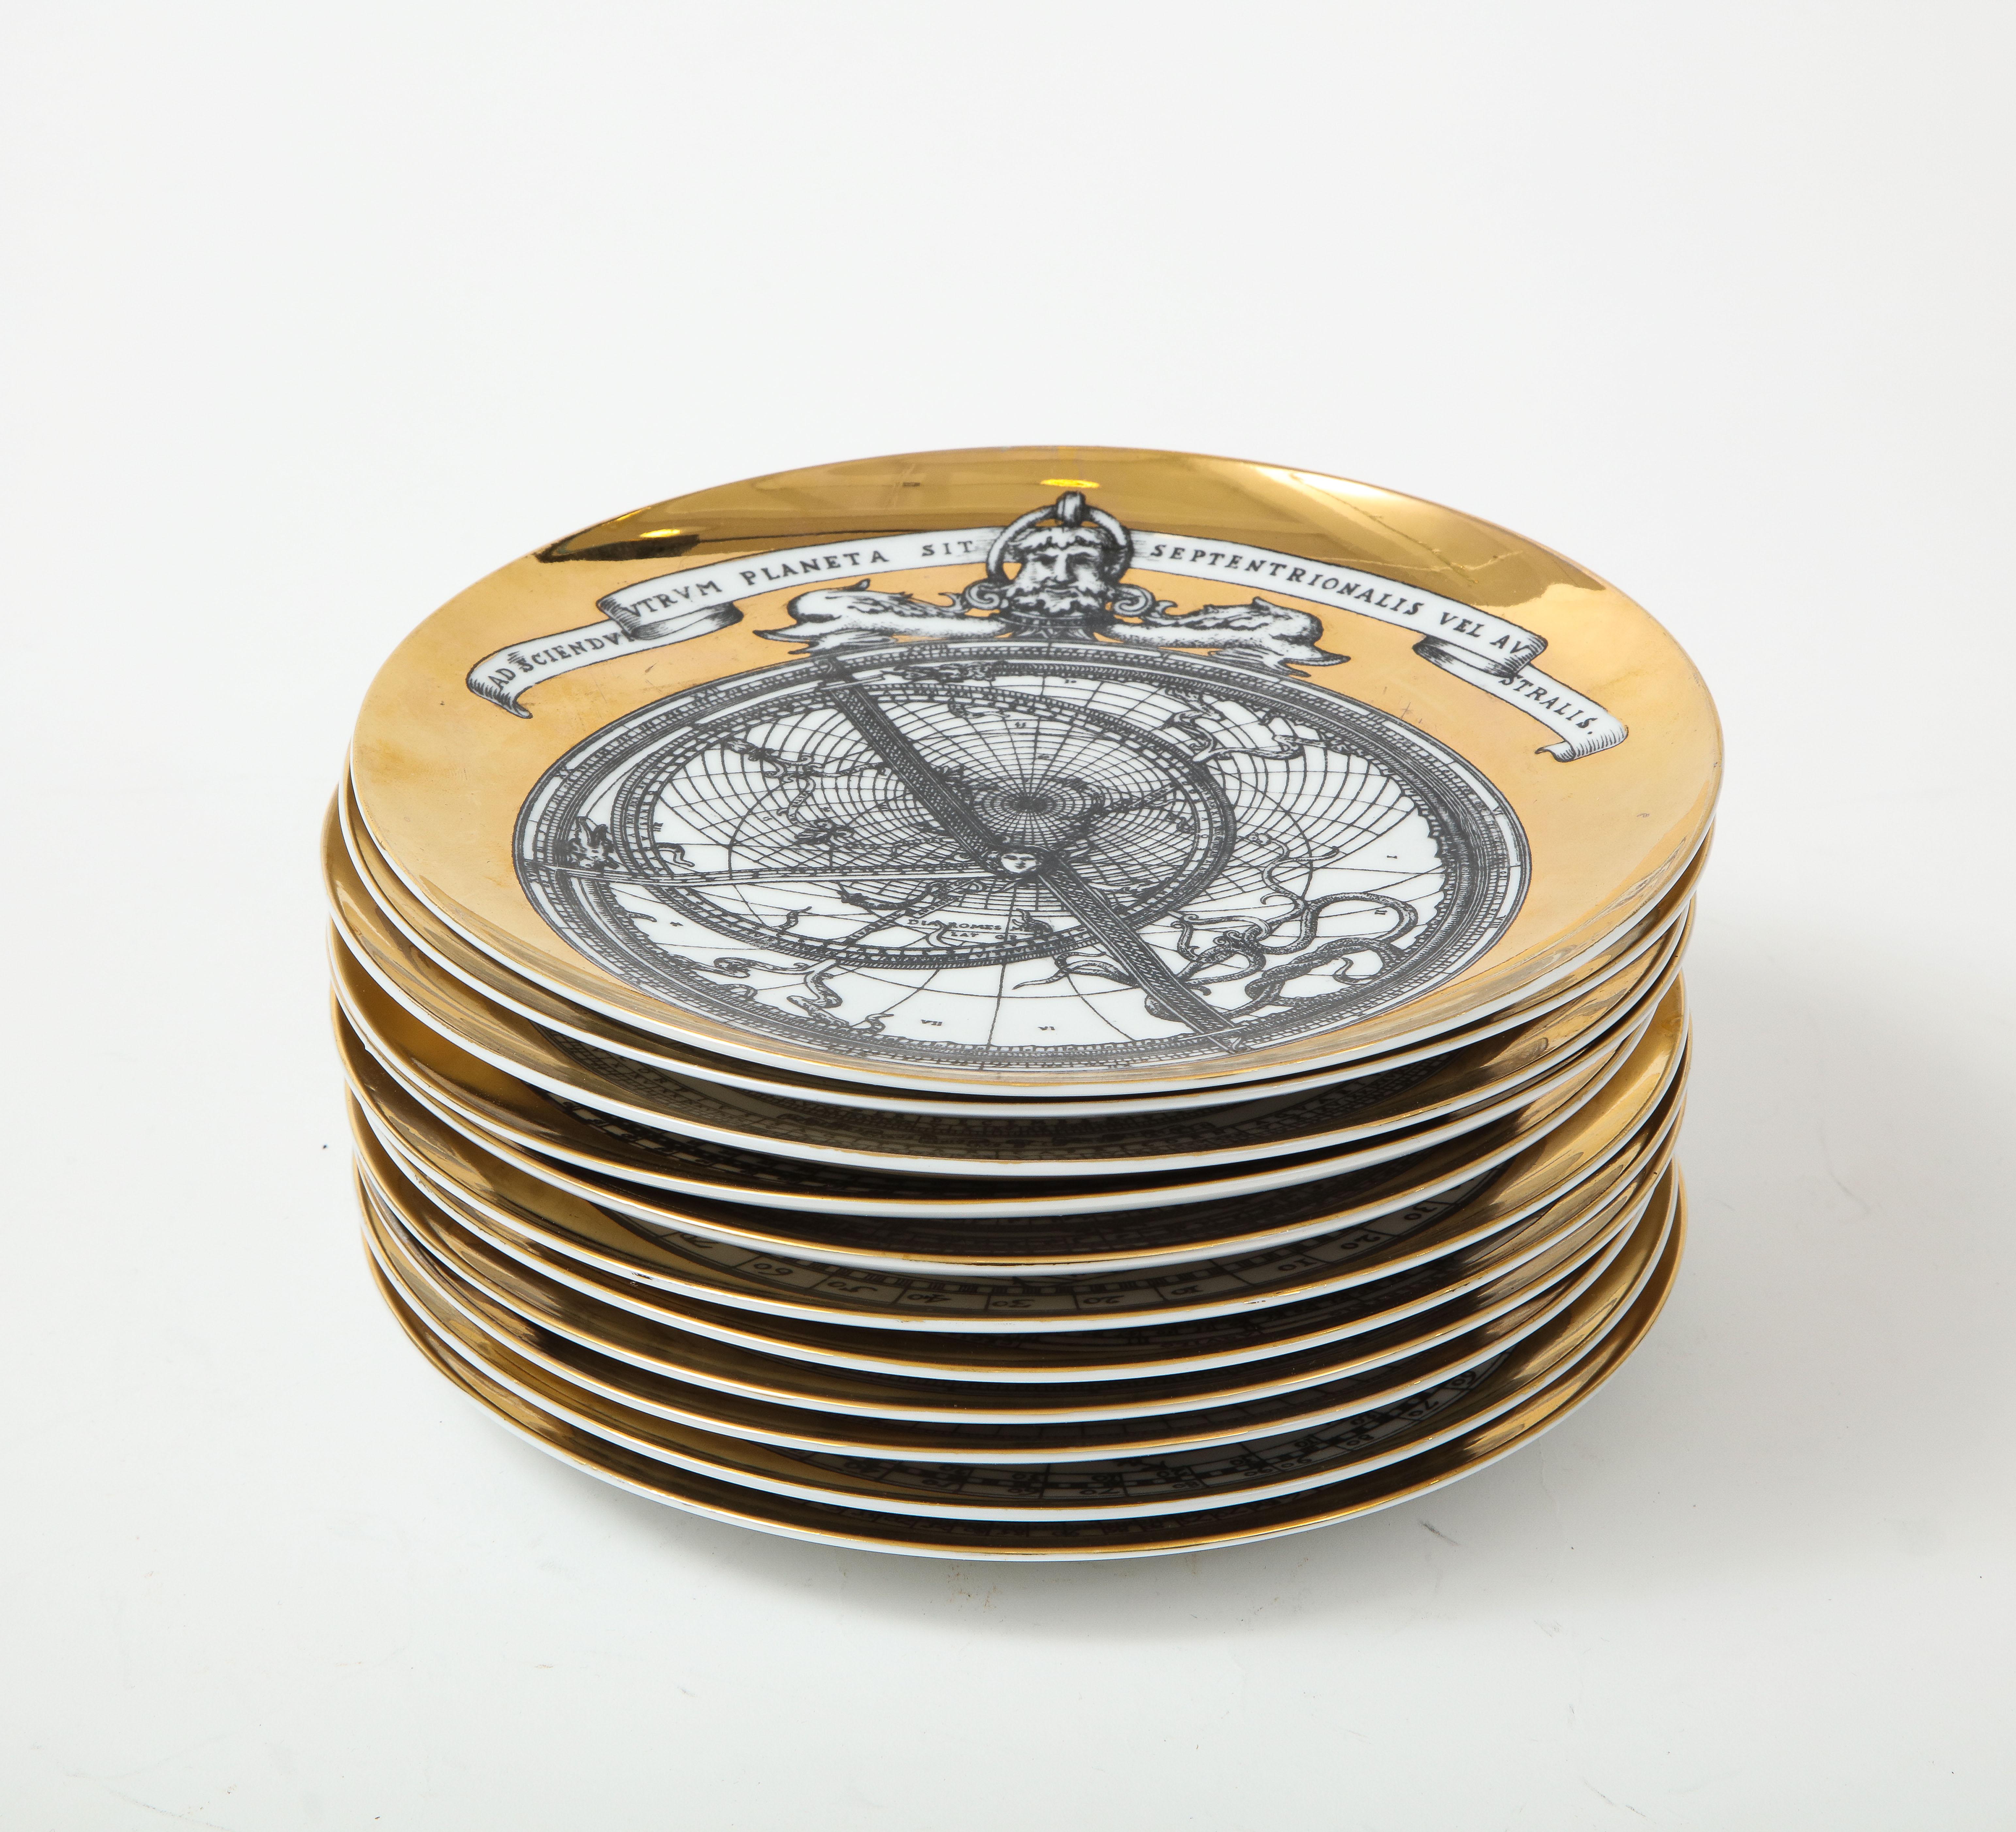 A set of eleven Piero Fornasetti plates. The plates are part of the Astrolabio series and each plate is stamped with the Fornasetti series mark. Fornasetti was a well known to have a love of astronomy and created this iconic design based on